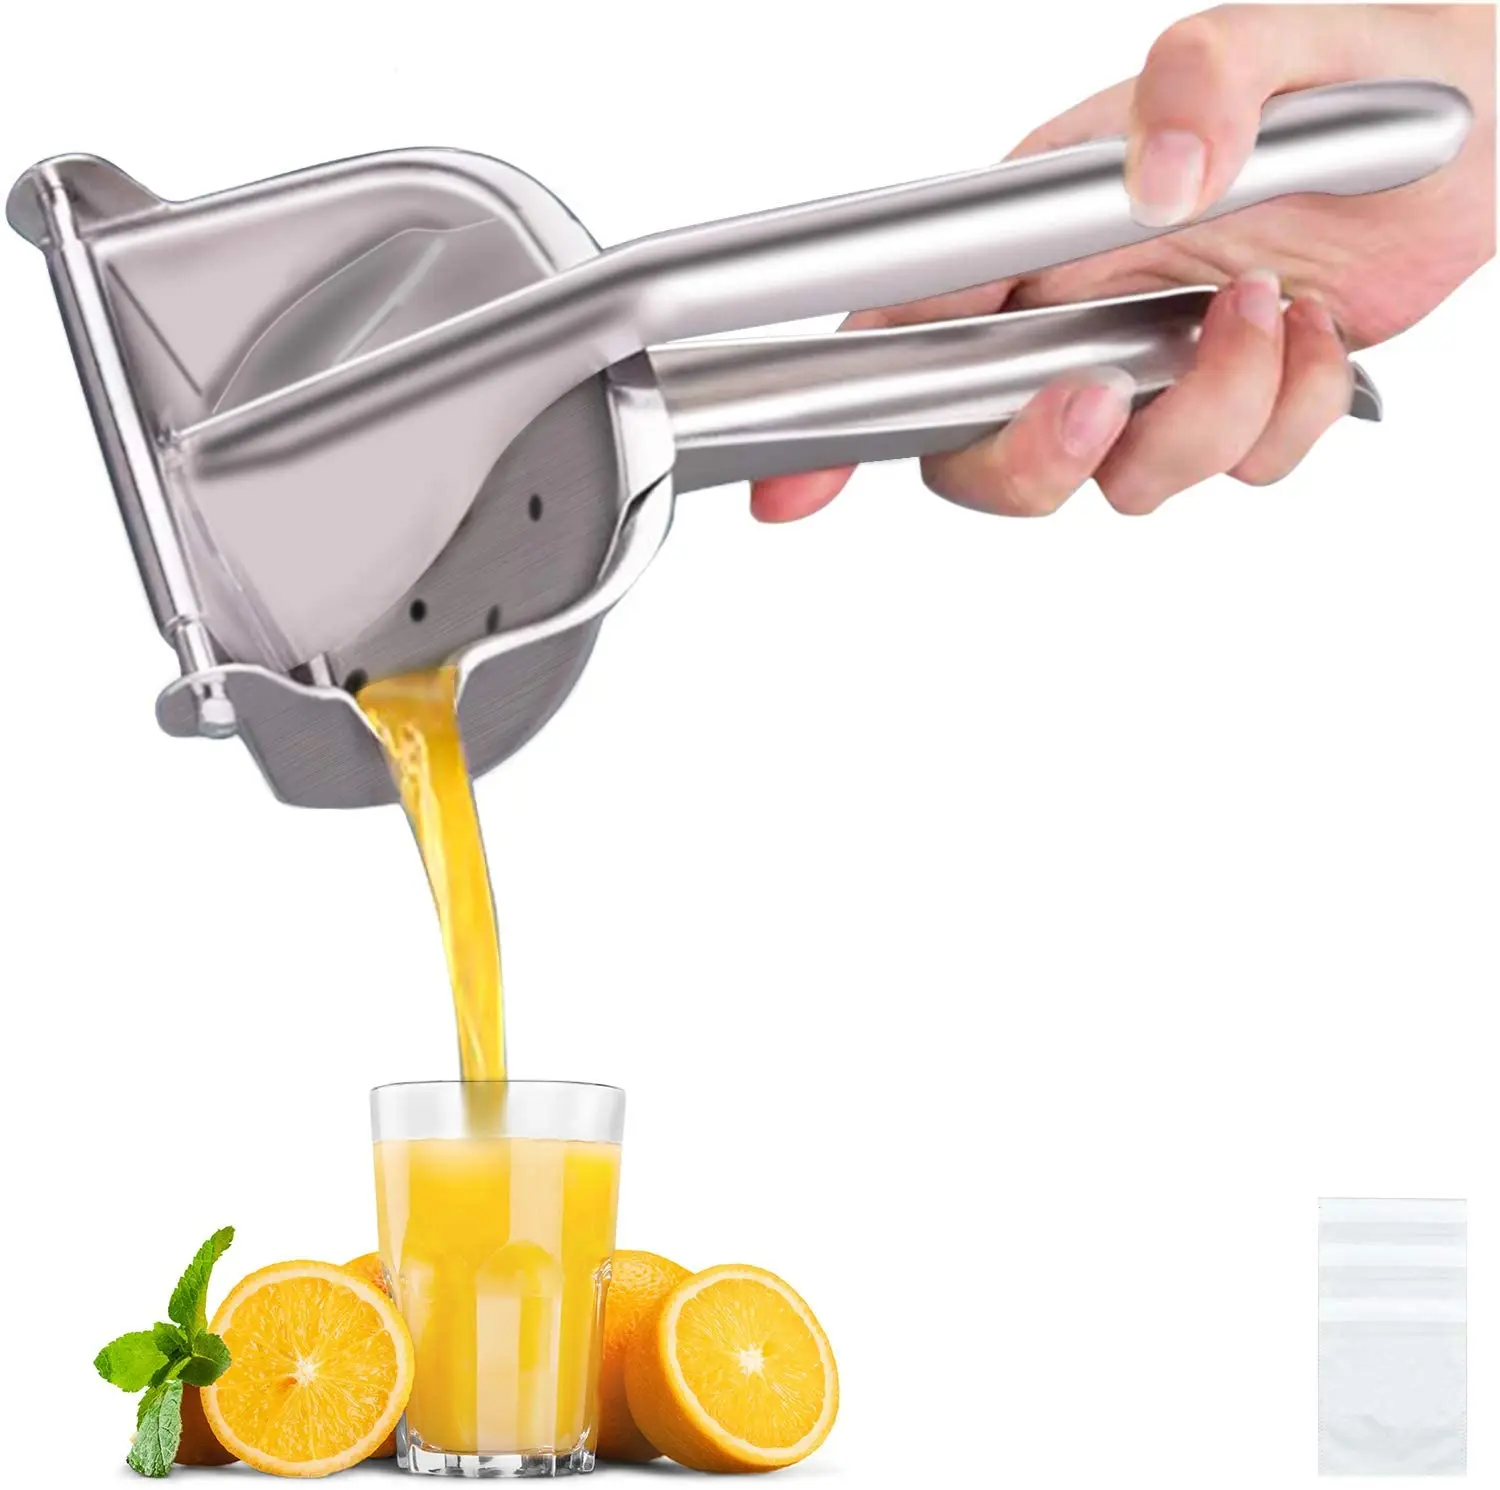 Lime Squeezer Bar Tool Citrus Press with 3.54 Inch Super Large Bowl with Silicone Handles Perfect for Juicing Oranges Big Lemons Limes AerWo Lemon Squeezer Juicer 304 Stainless Steel Manual Juicer 